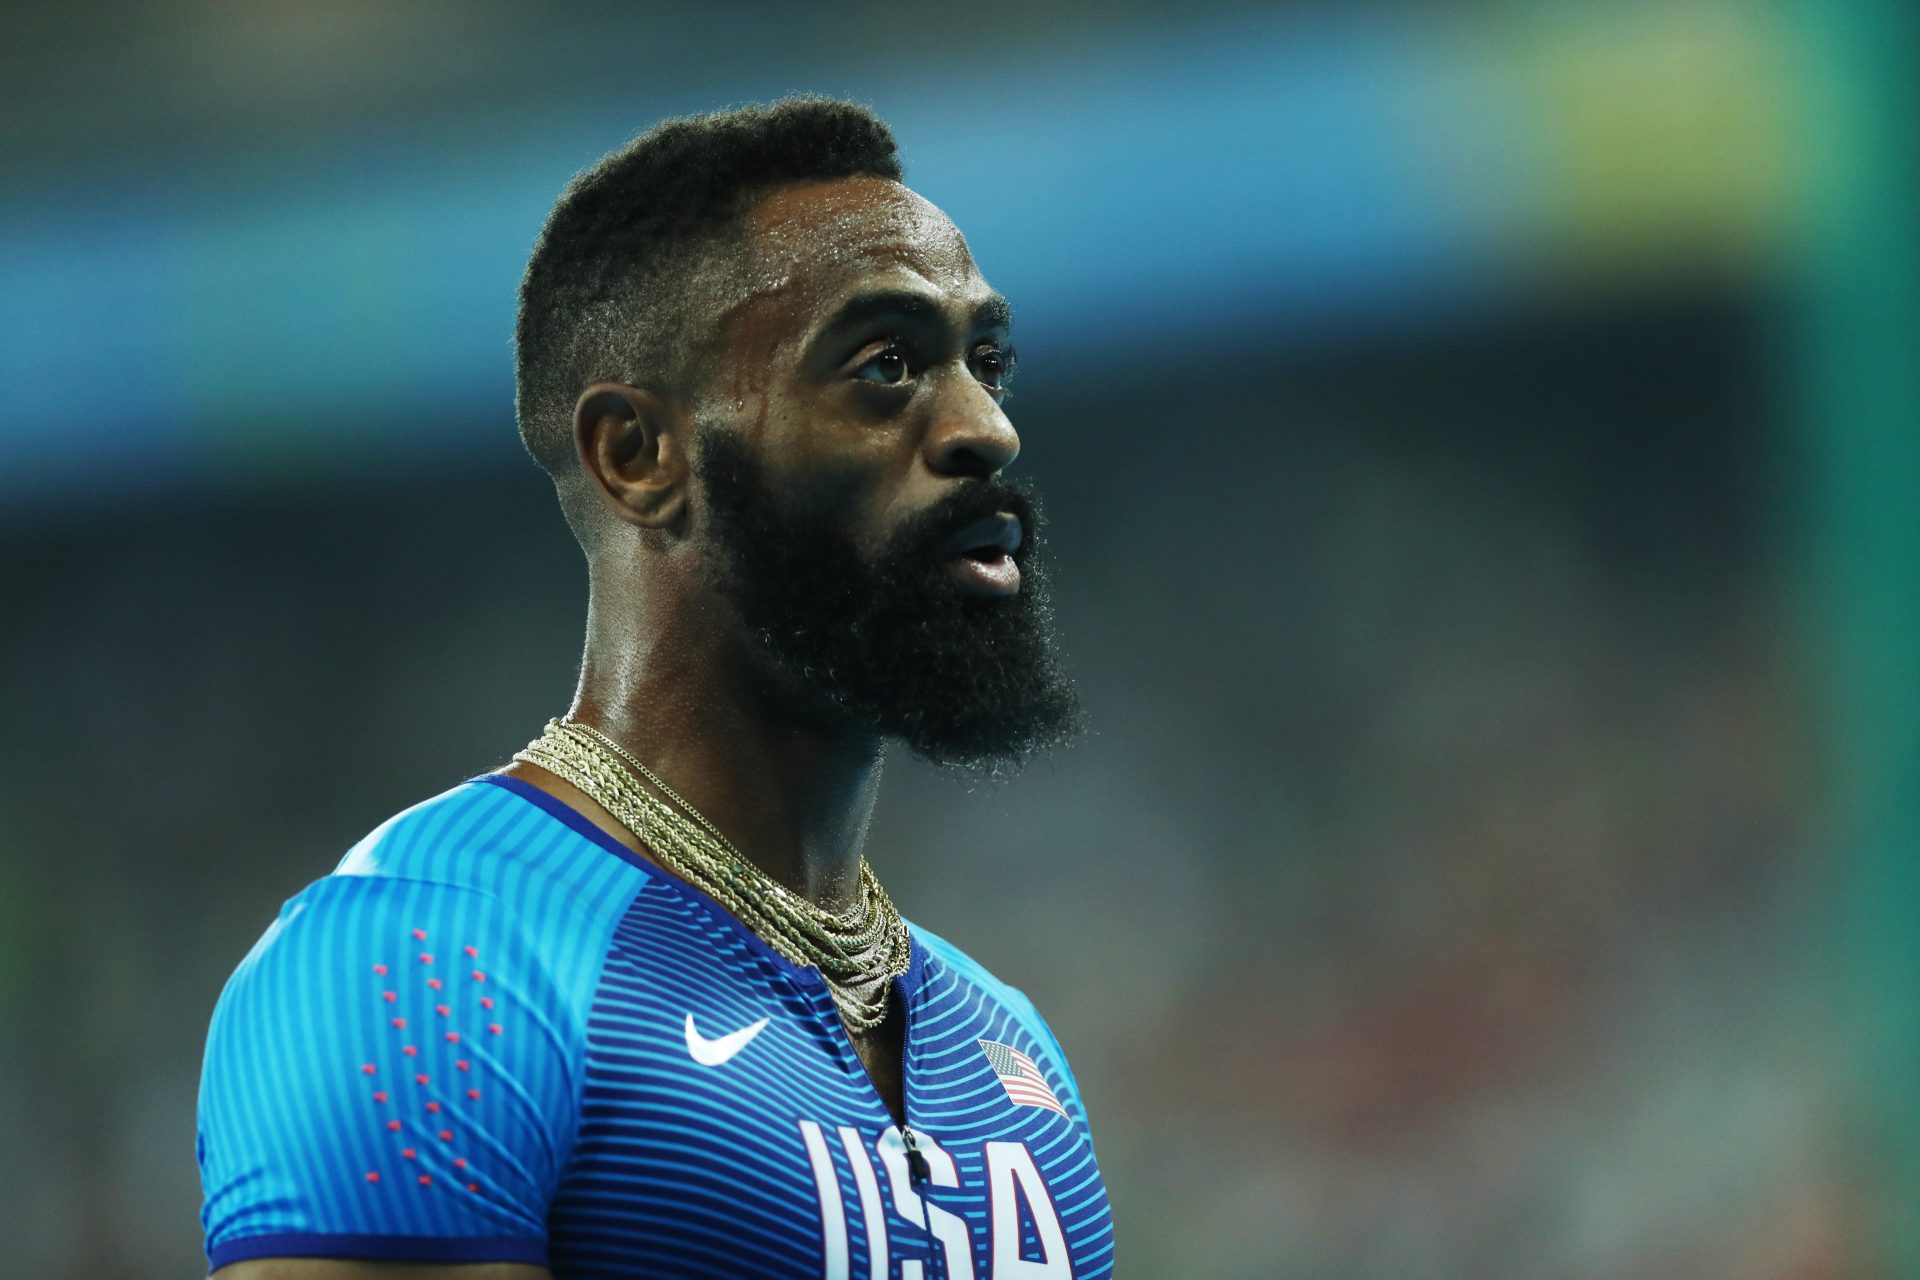 From heaven to hell: Tyson Gay, the second fastest man in history